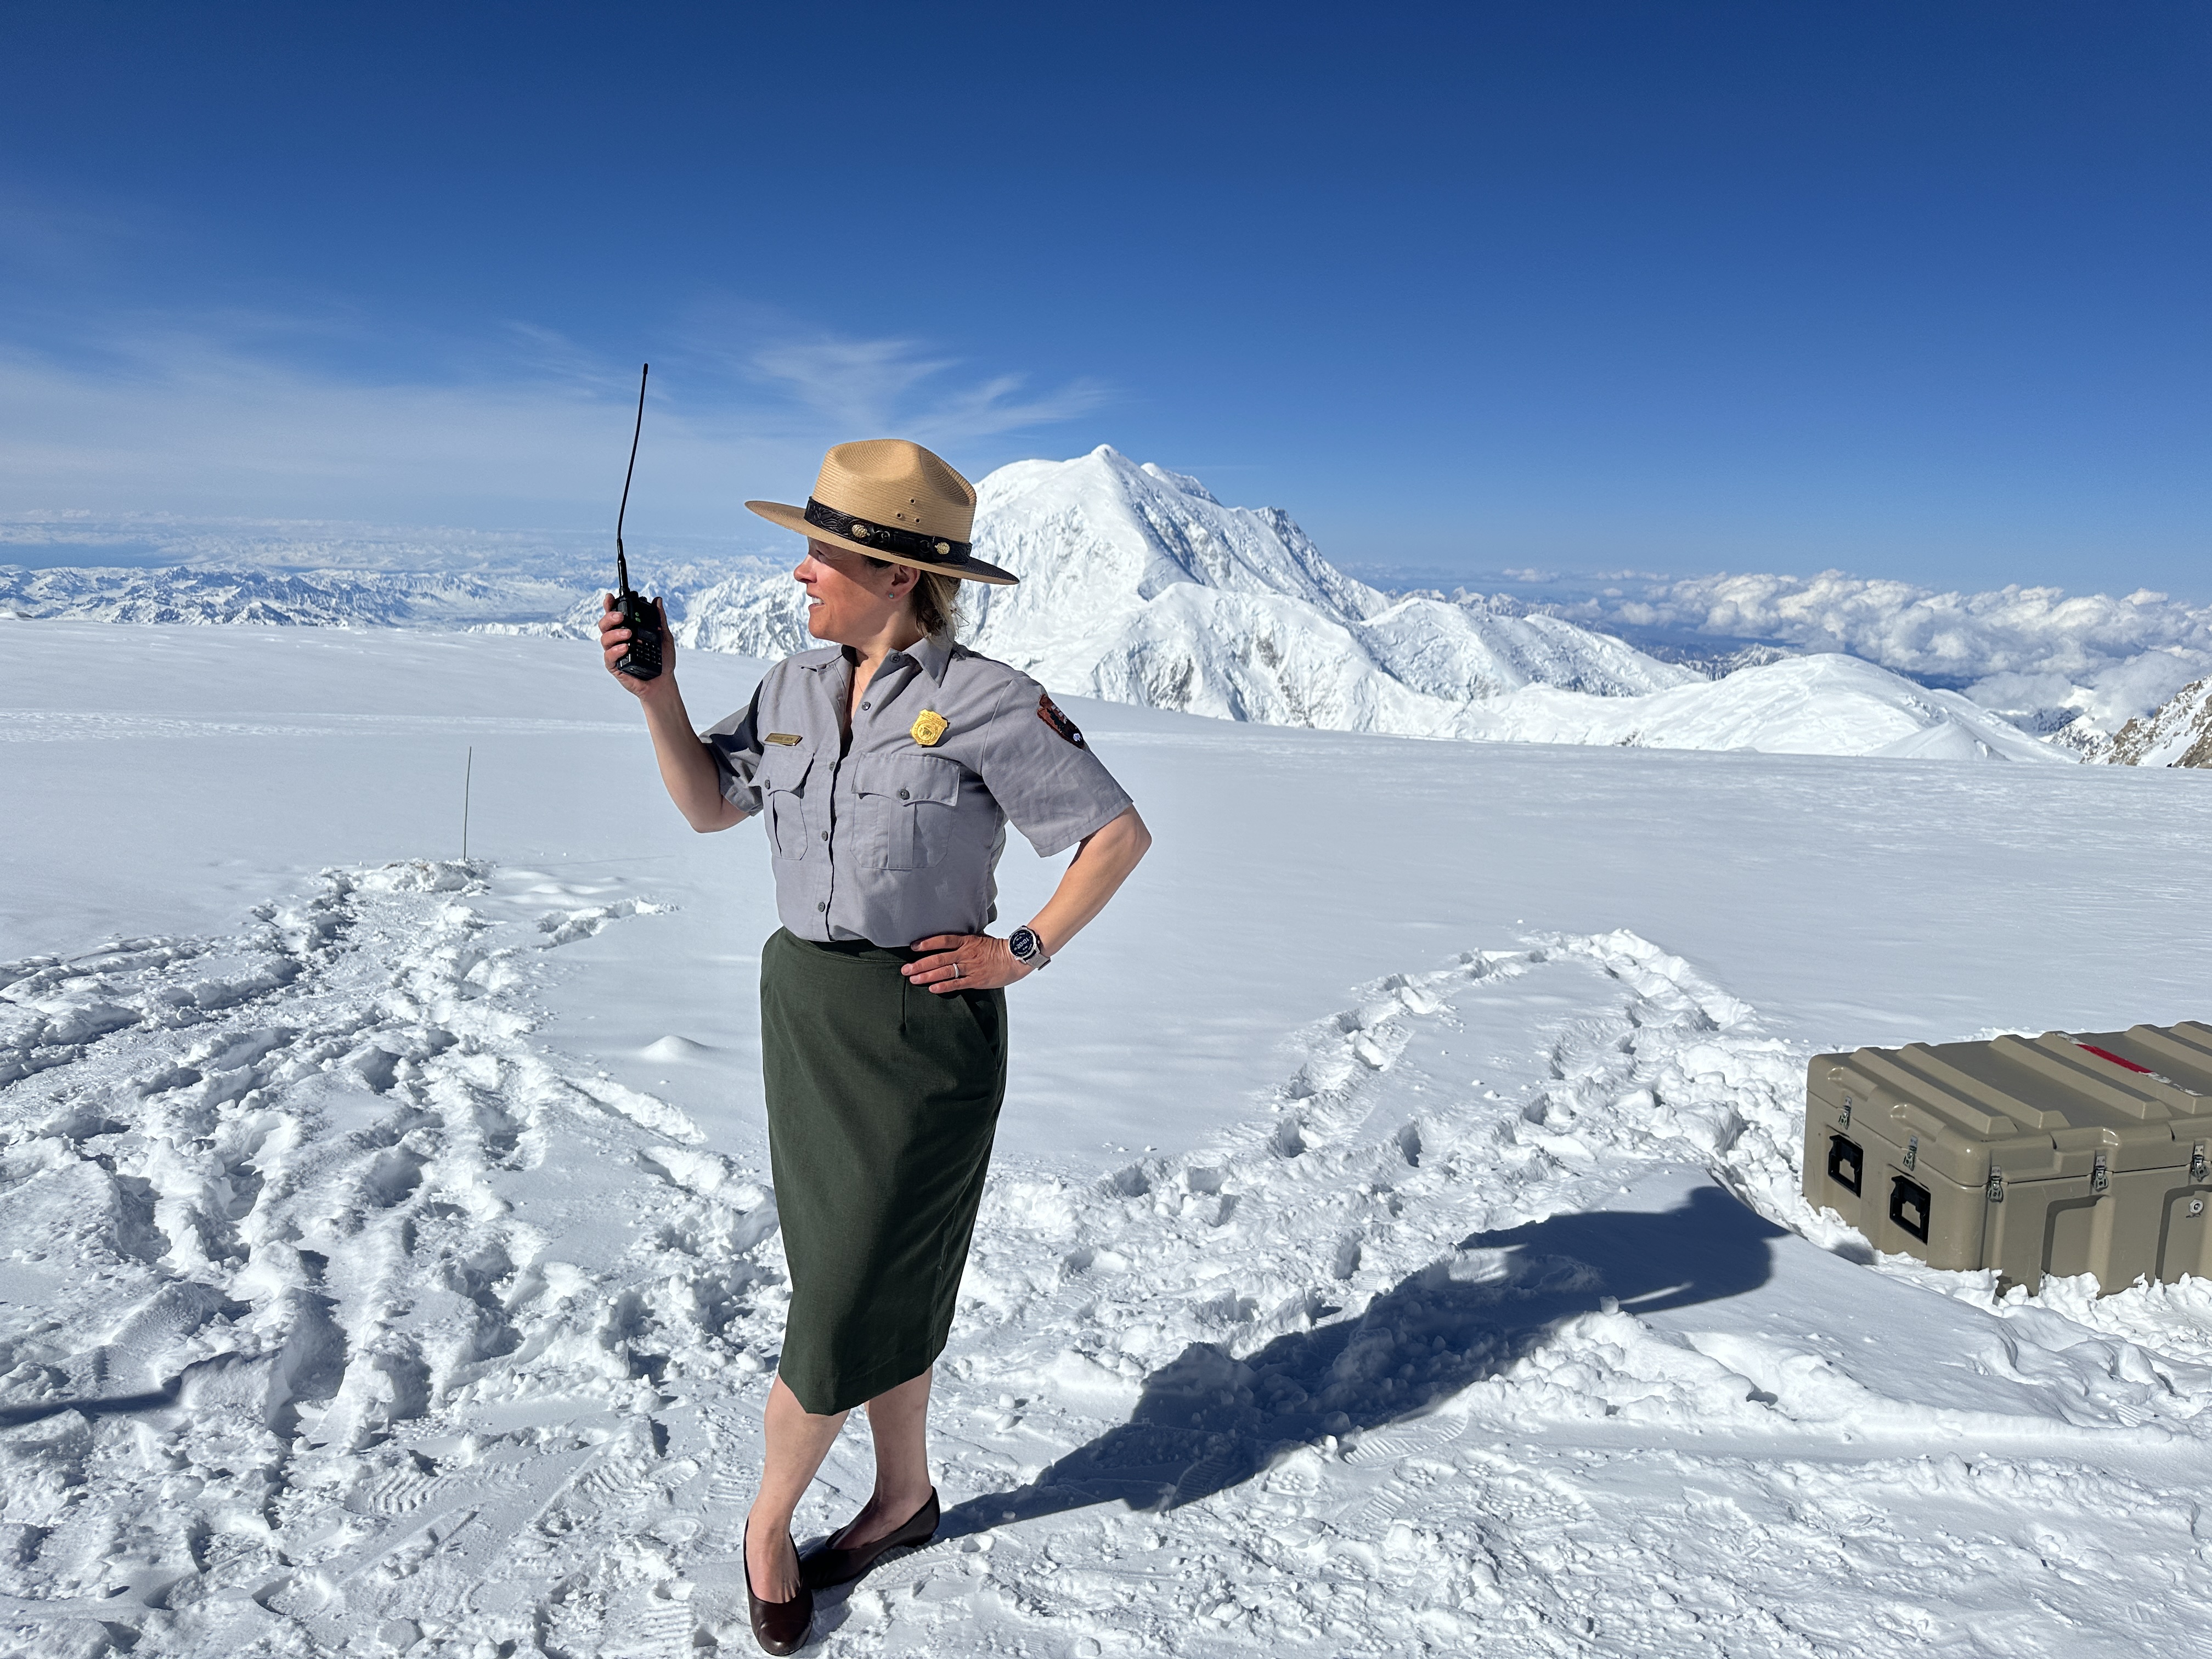 A park ranger in the traditional NPS uniform including pumps, a skirt, and a flat hat, makes a radio call from a glacier